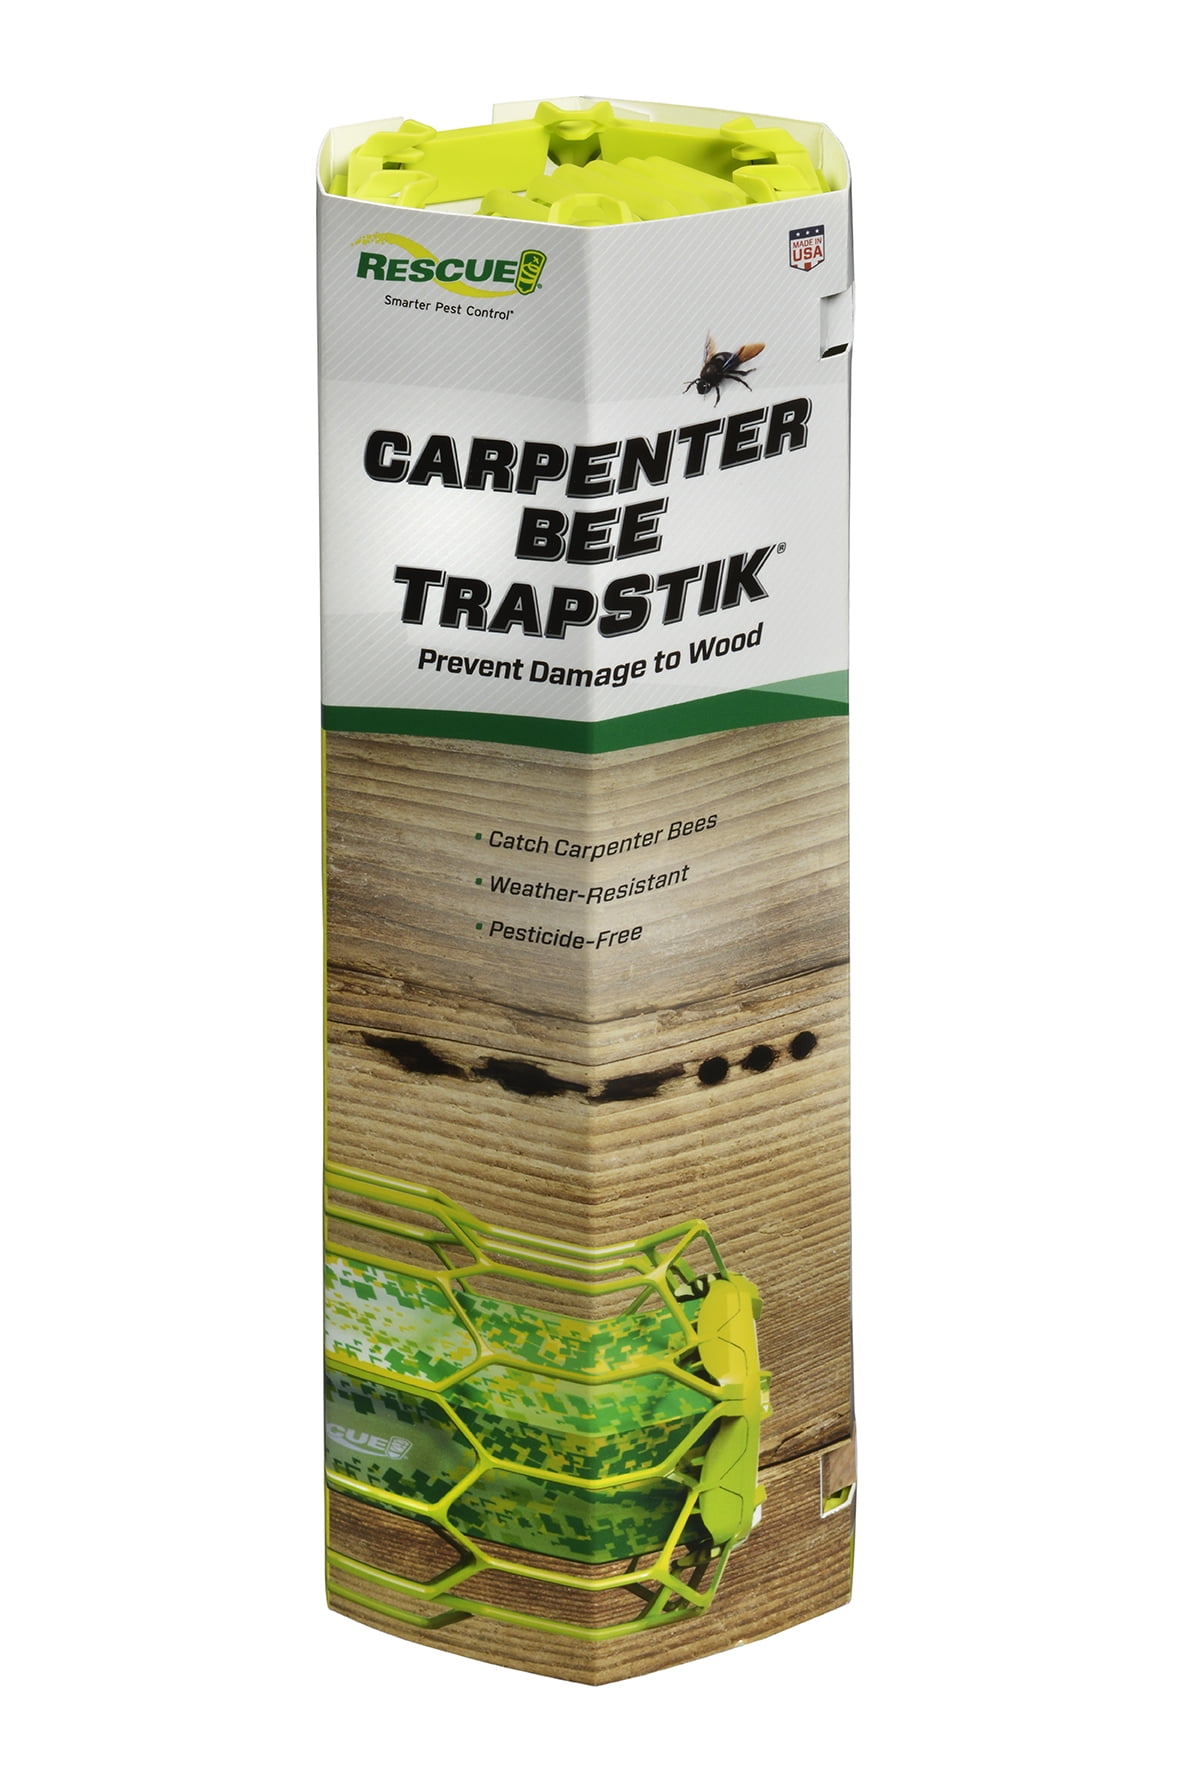 RESCUE! Carpenter Bee Trapstik Bee and Wasp Trap, 1 Pack